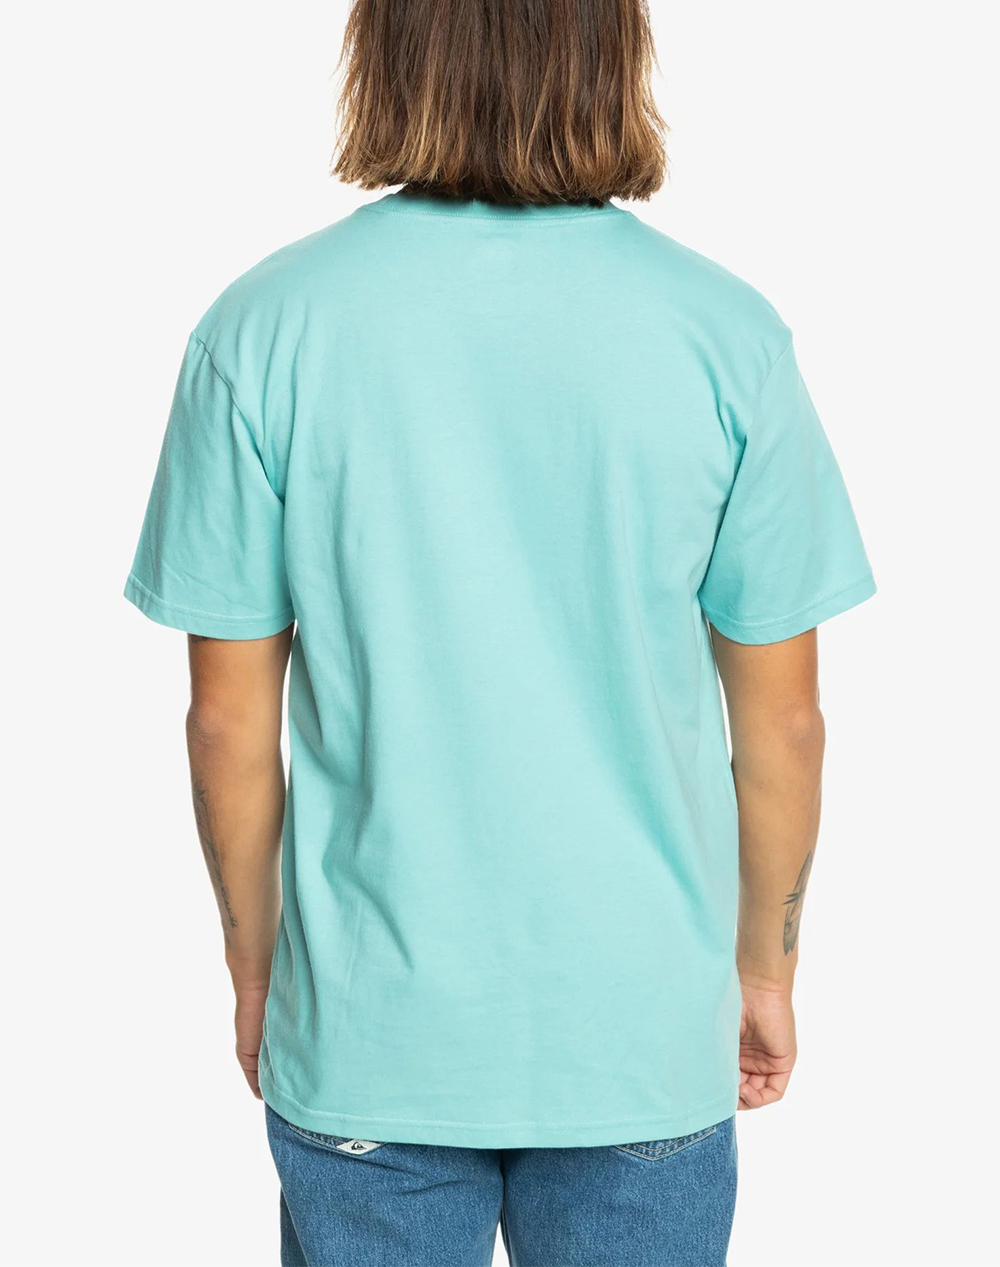 QUIKSILVER FLOATING AROUND SS MENS T-SHIRT